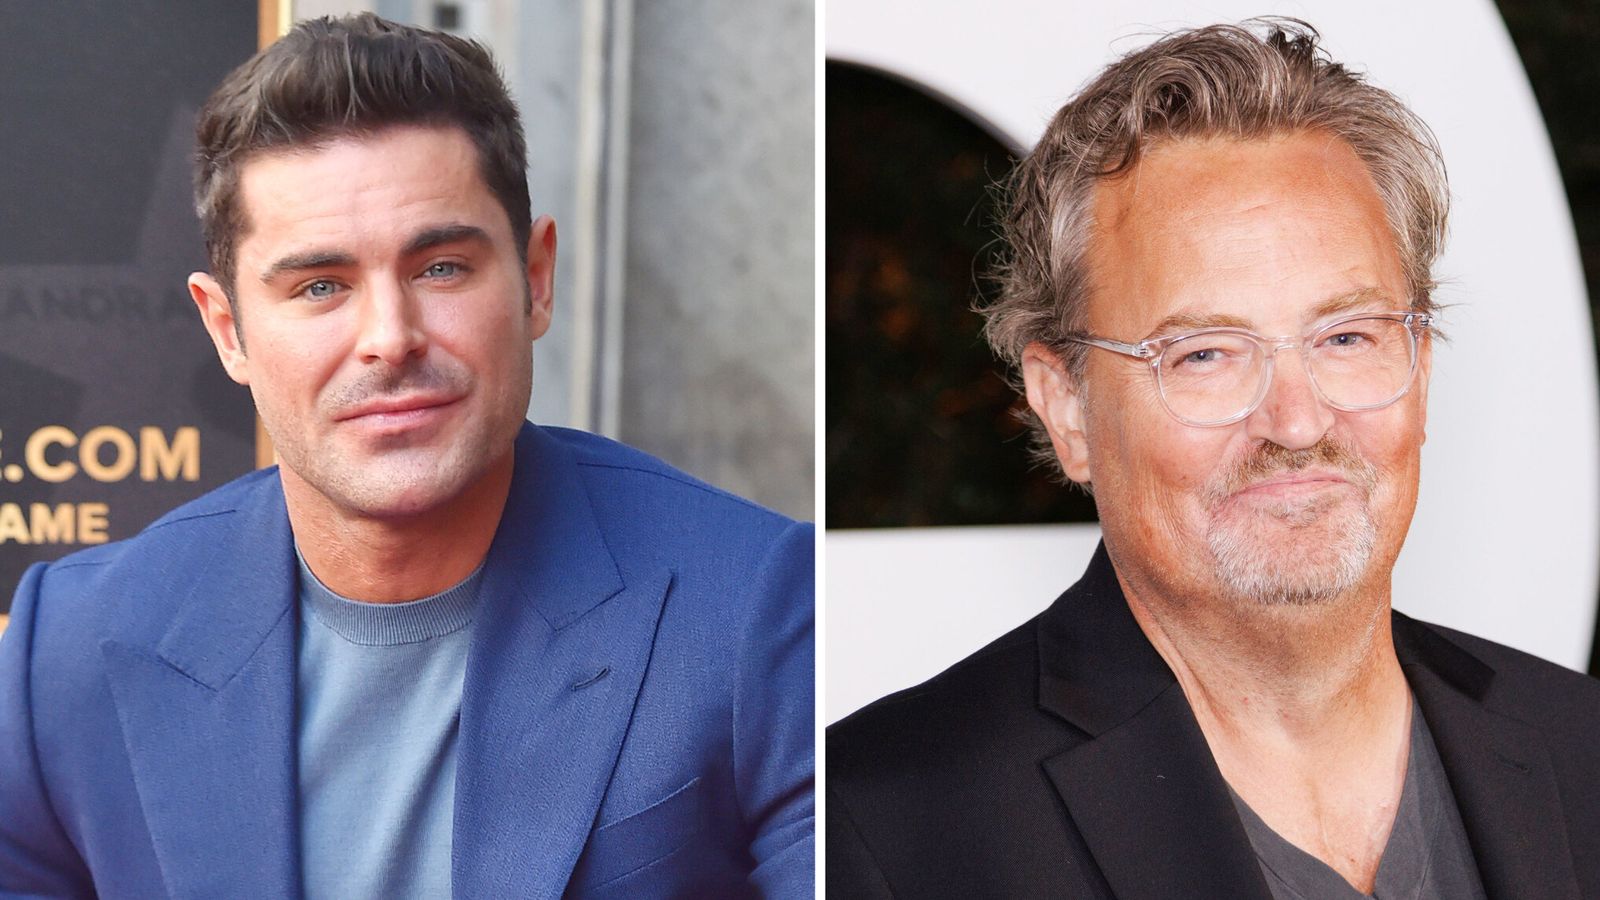 Matthew Perry wanted Zac Efron to play him in biopic - as Friends star praised for 'generosity'